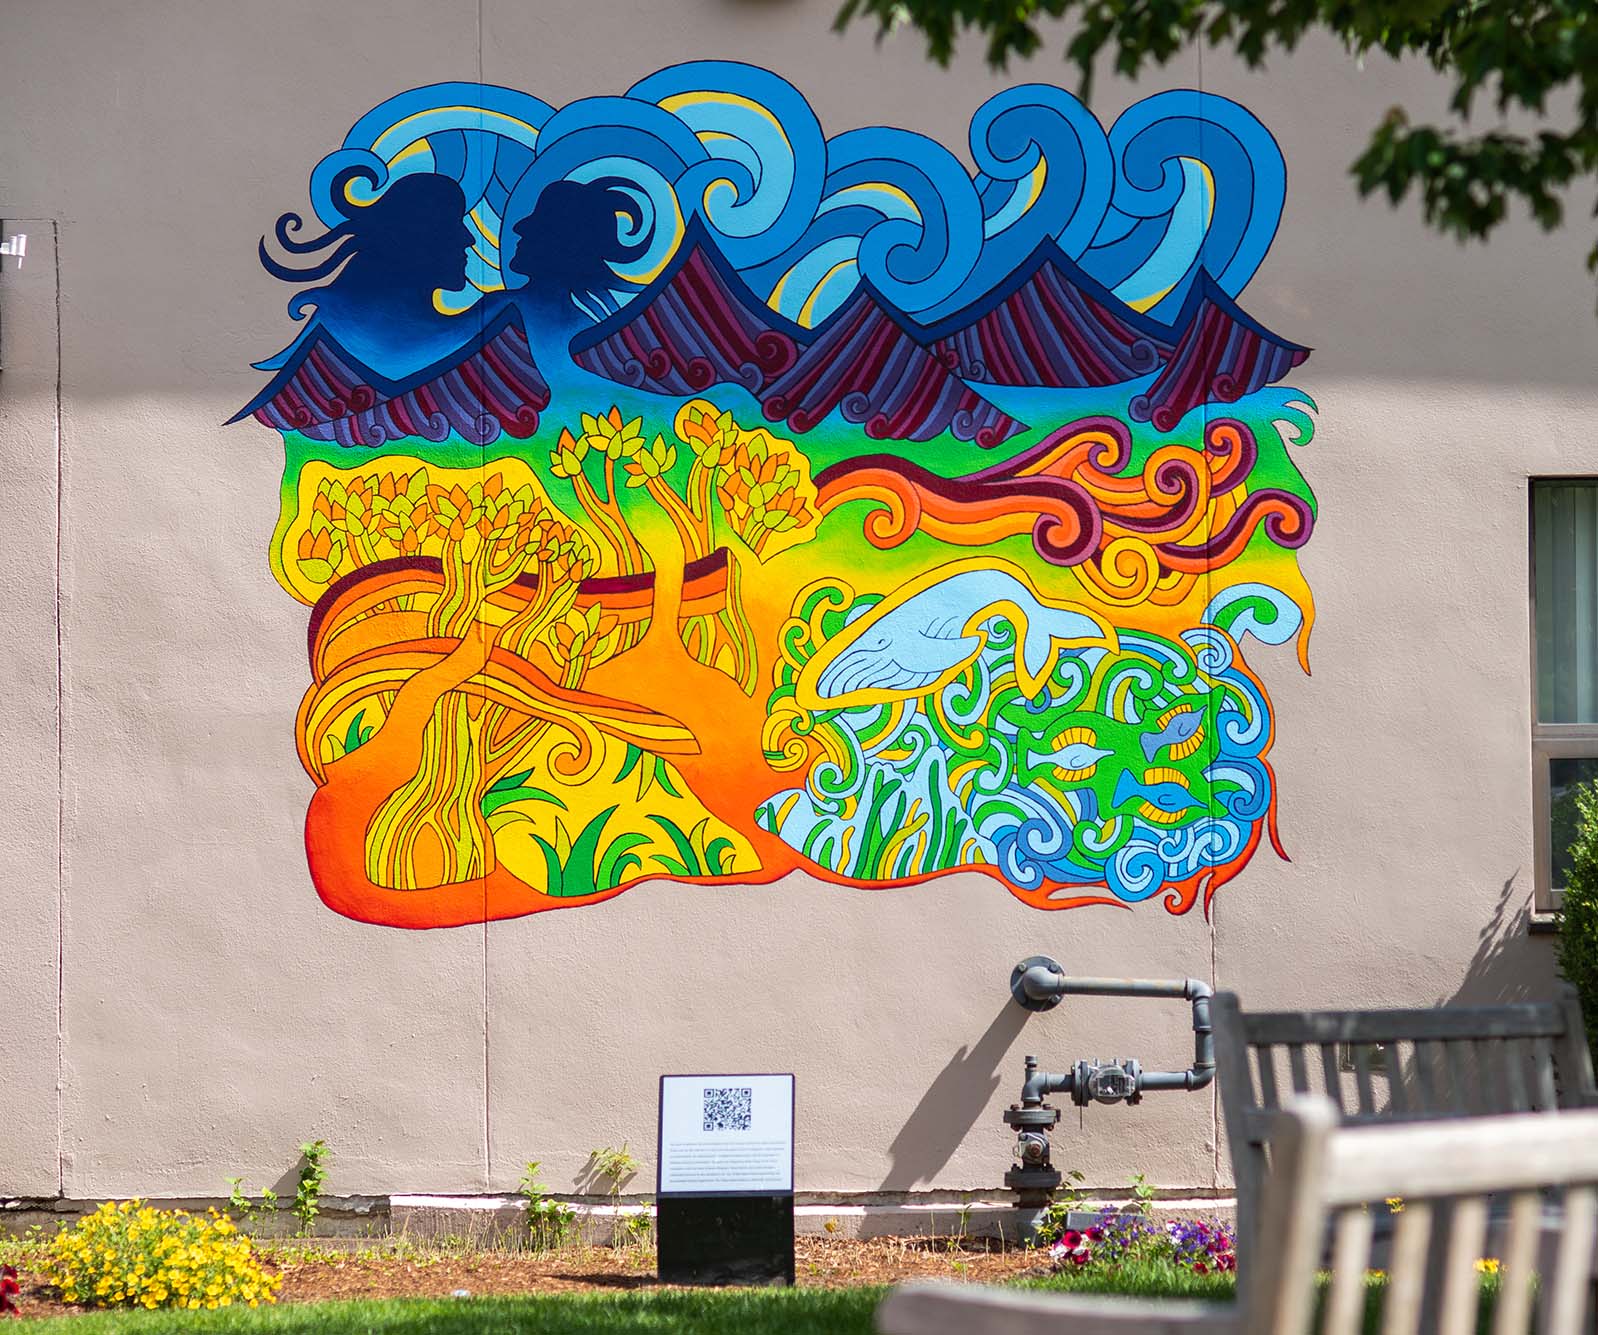 Photo of a completed mural on the Kenmore Building. Mural depicts a colorful, rainbow mishmash of nature - waves, a whale, mountains, fish, wind, and trees.